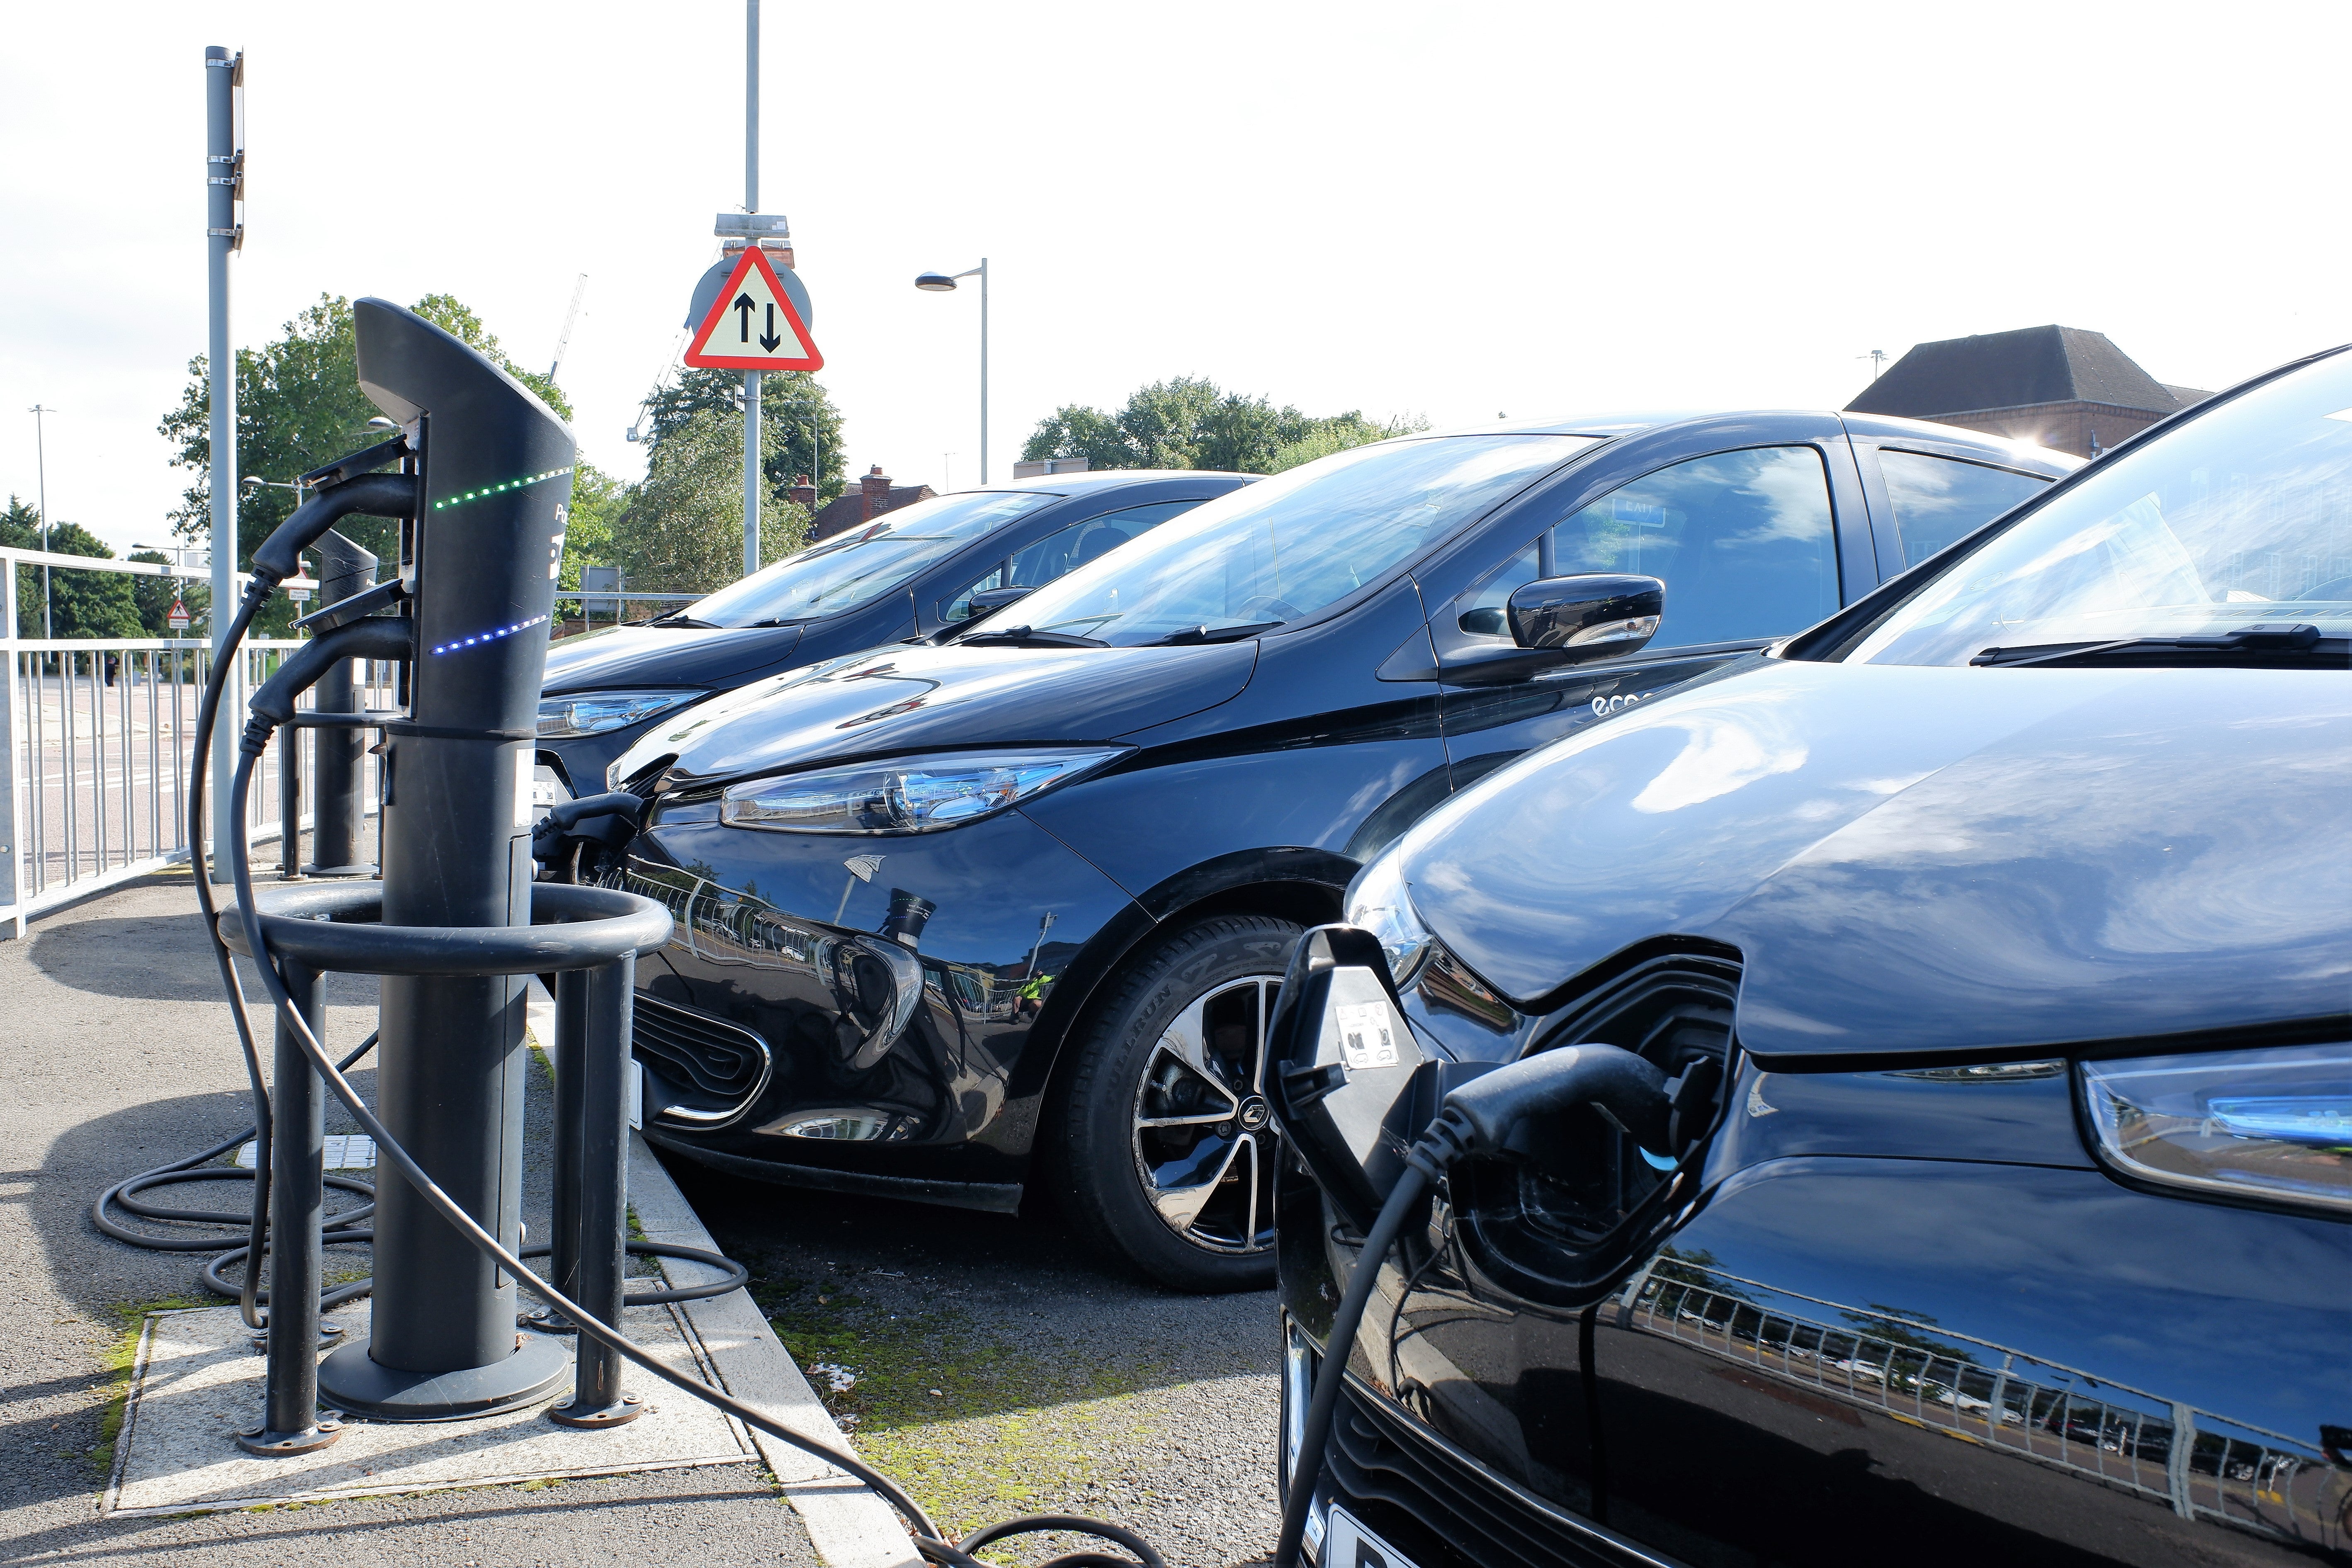 The government announced in March that it aims to install 300,000 public charging points by 2030